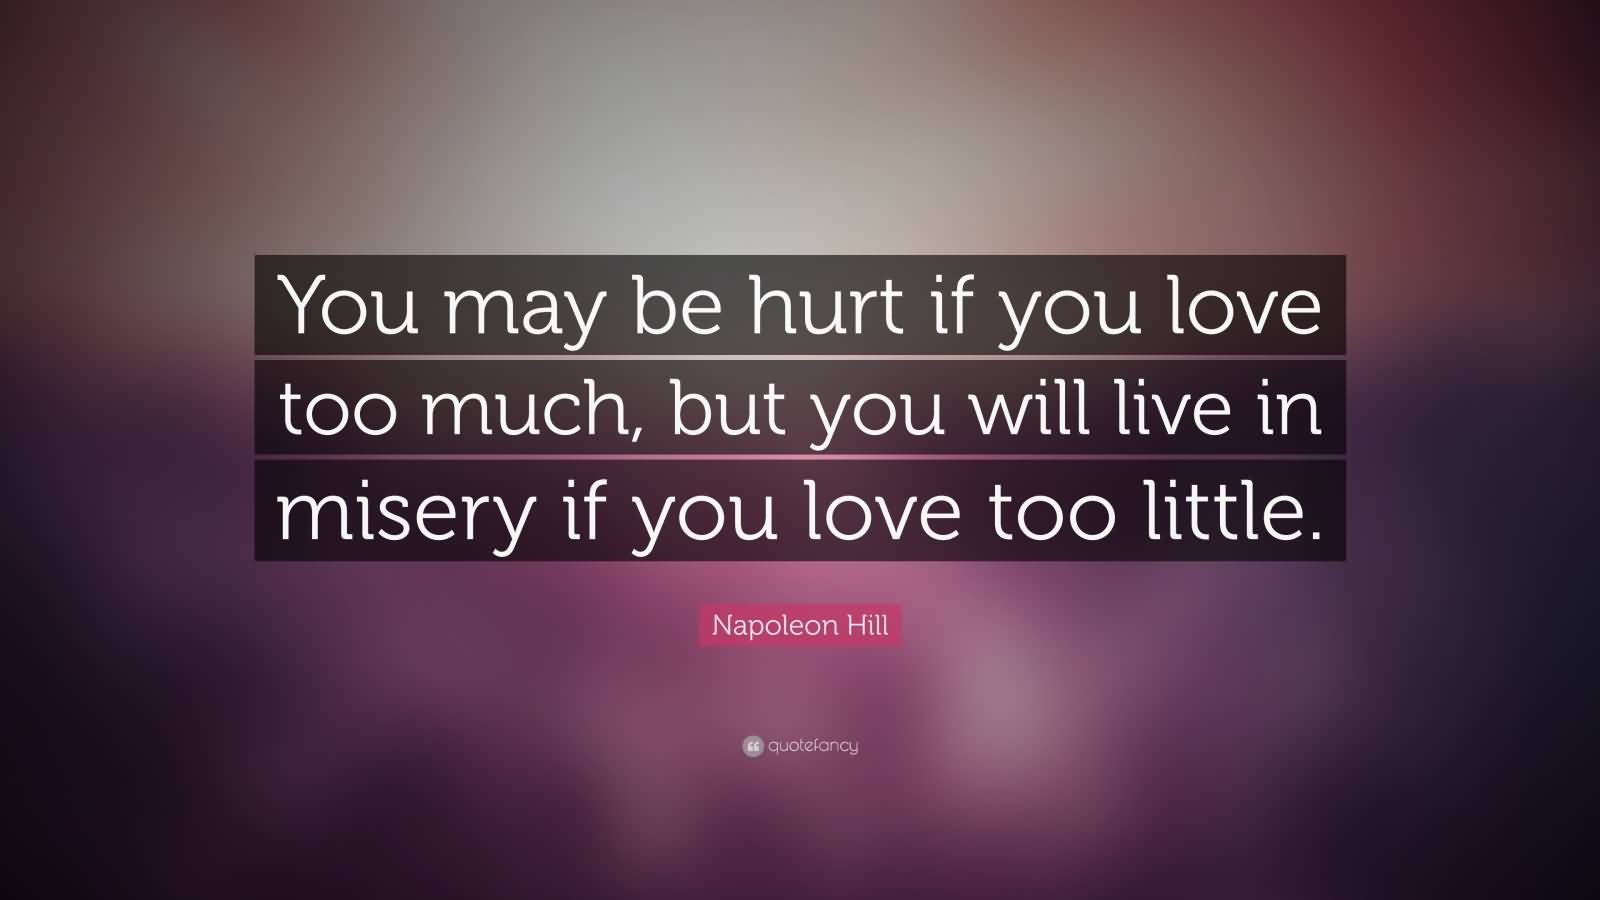 You may be hurt if you love too much but you will live in misery